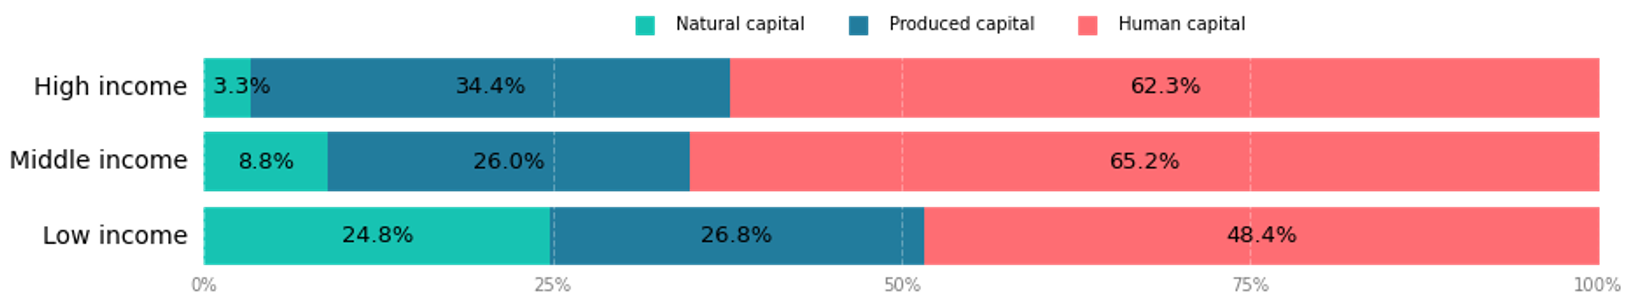 Picture shows the relative shares of natural, produced and human capital across low, middle and high income countries.